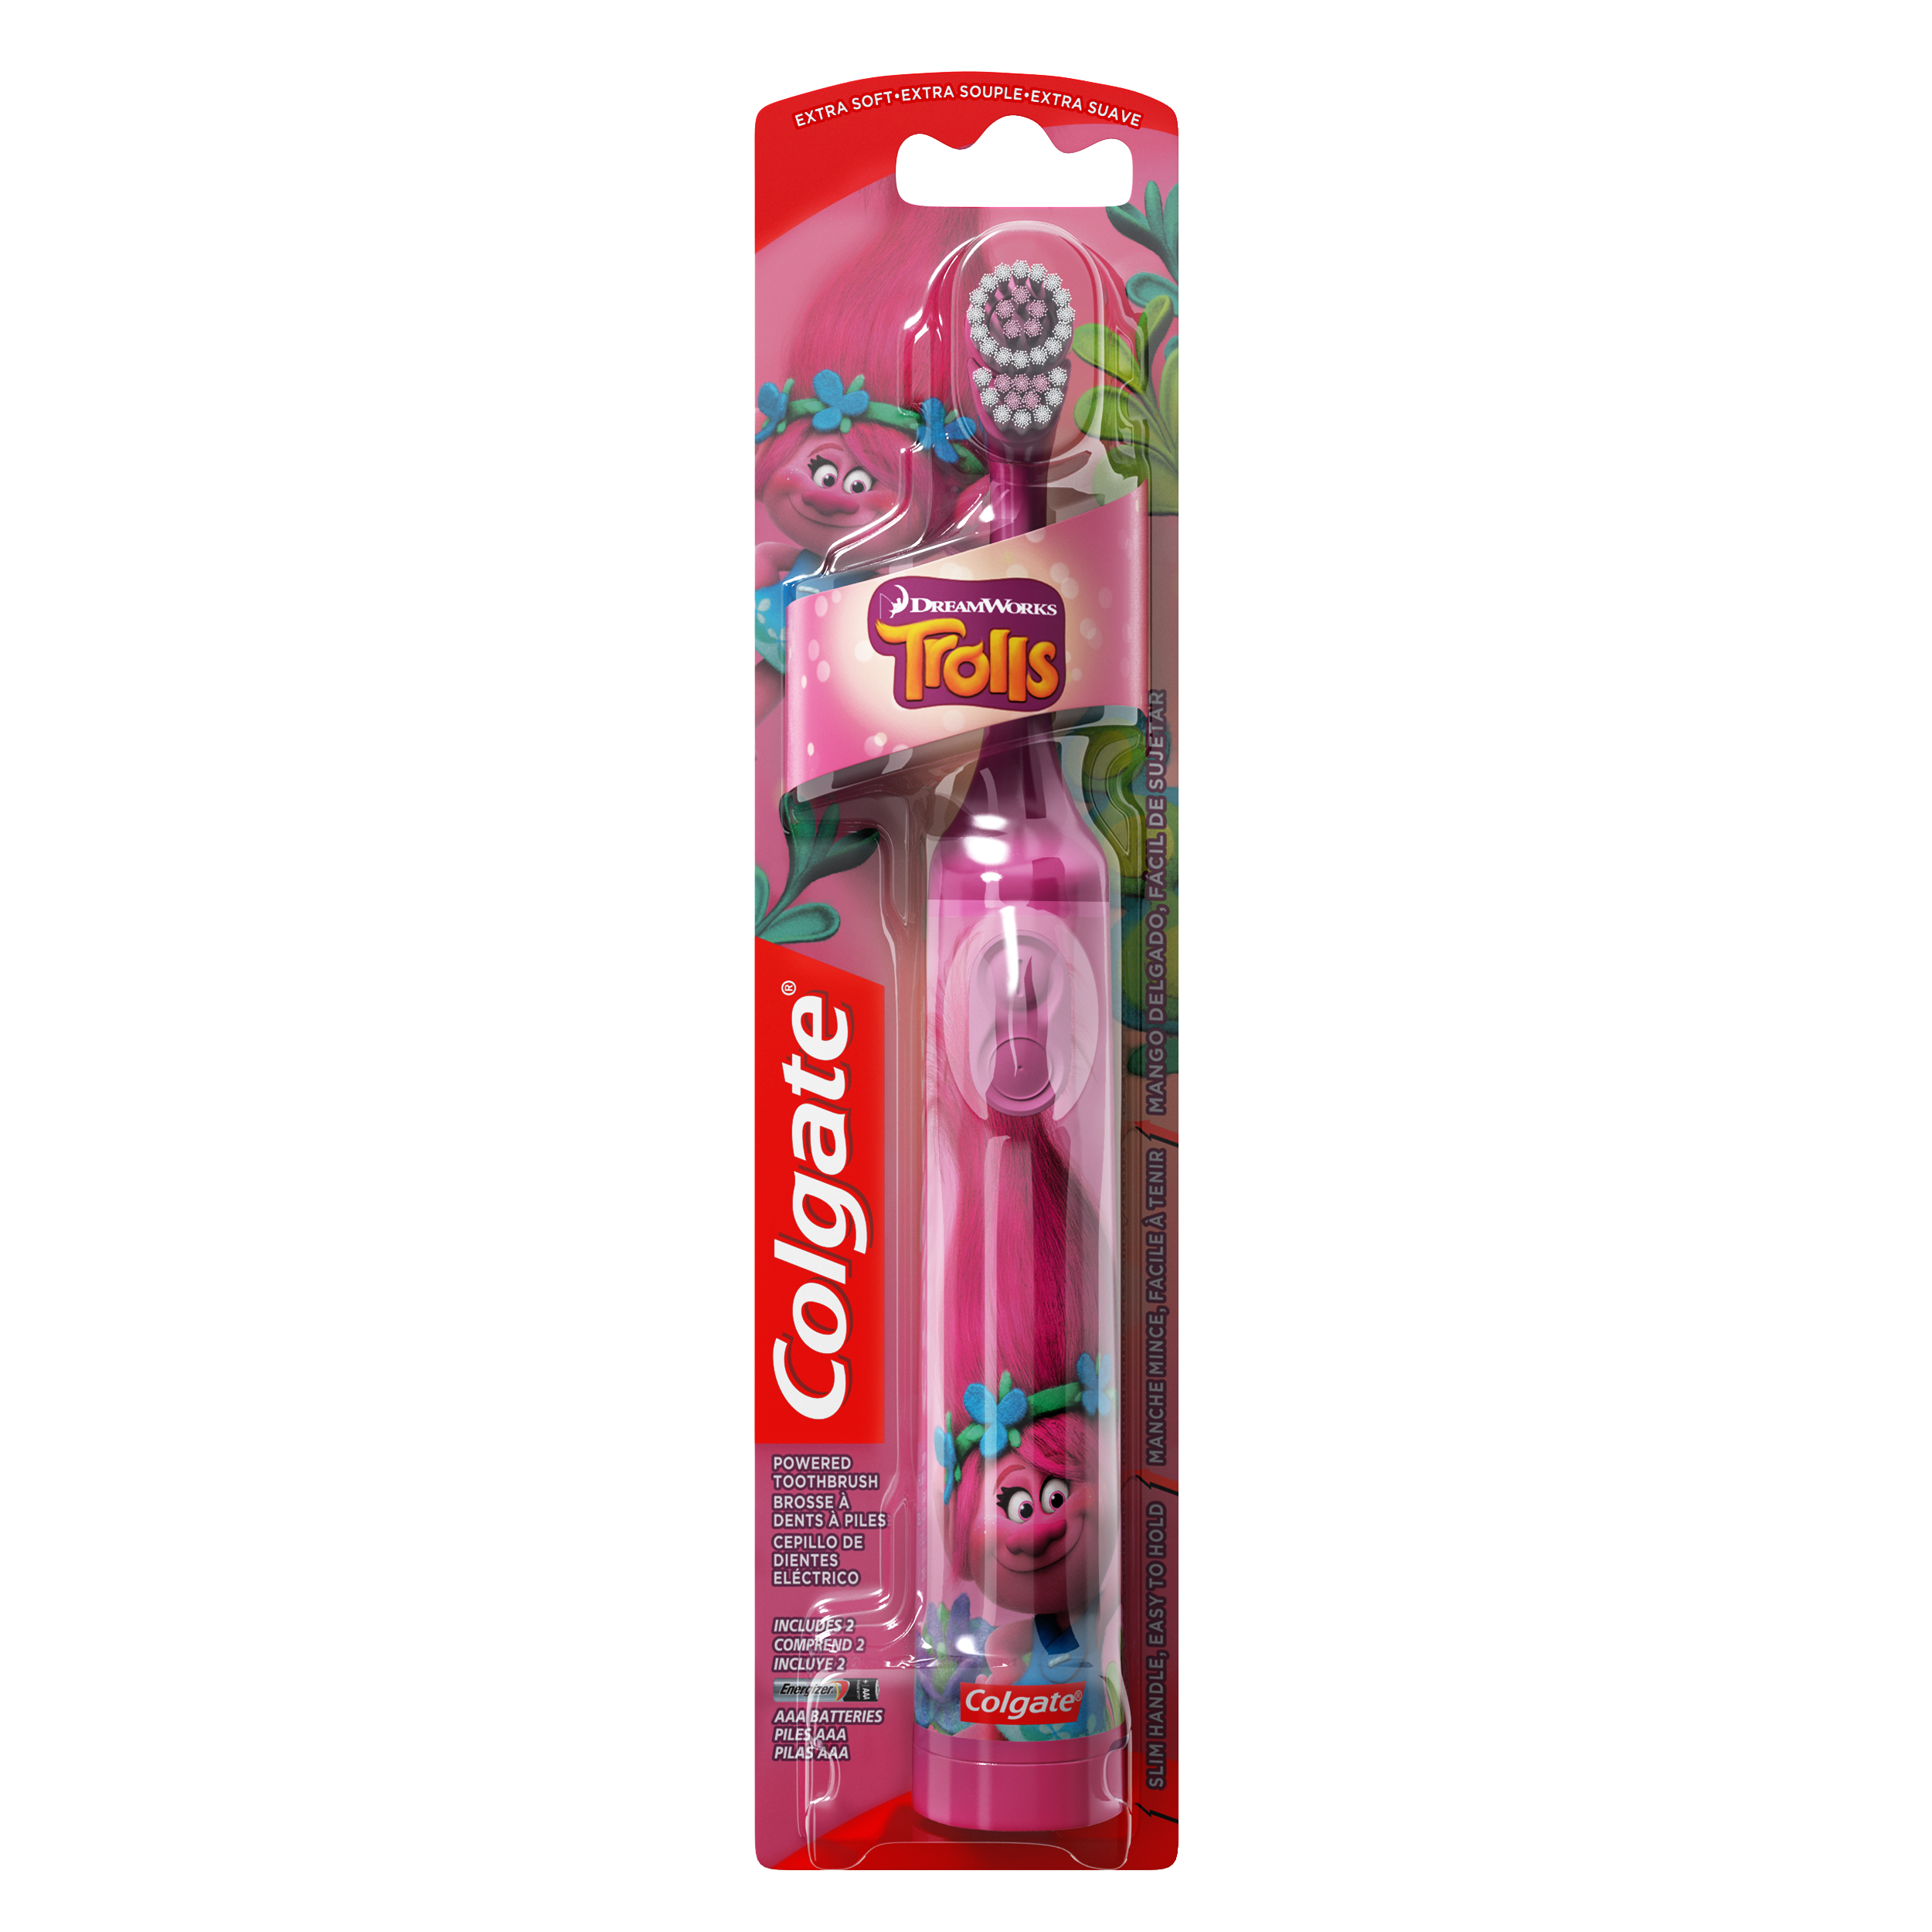 Colgate Kids Spinning Battery Powered Toothbrush, Trolls, Extra Soft, 1 Ct - image 1 of 2